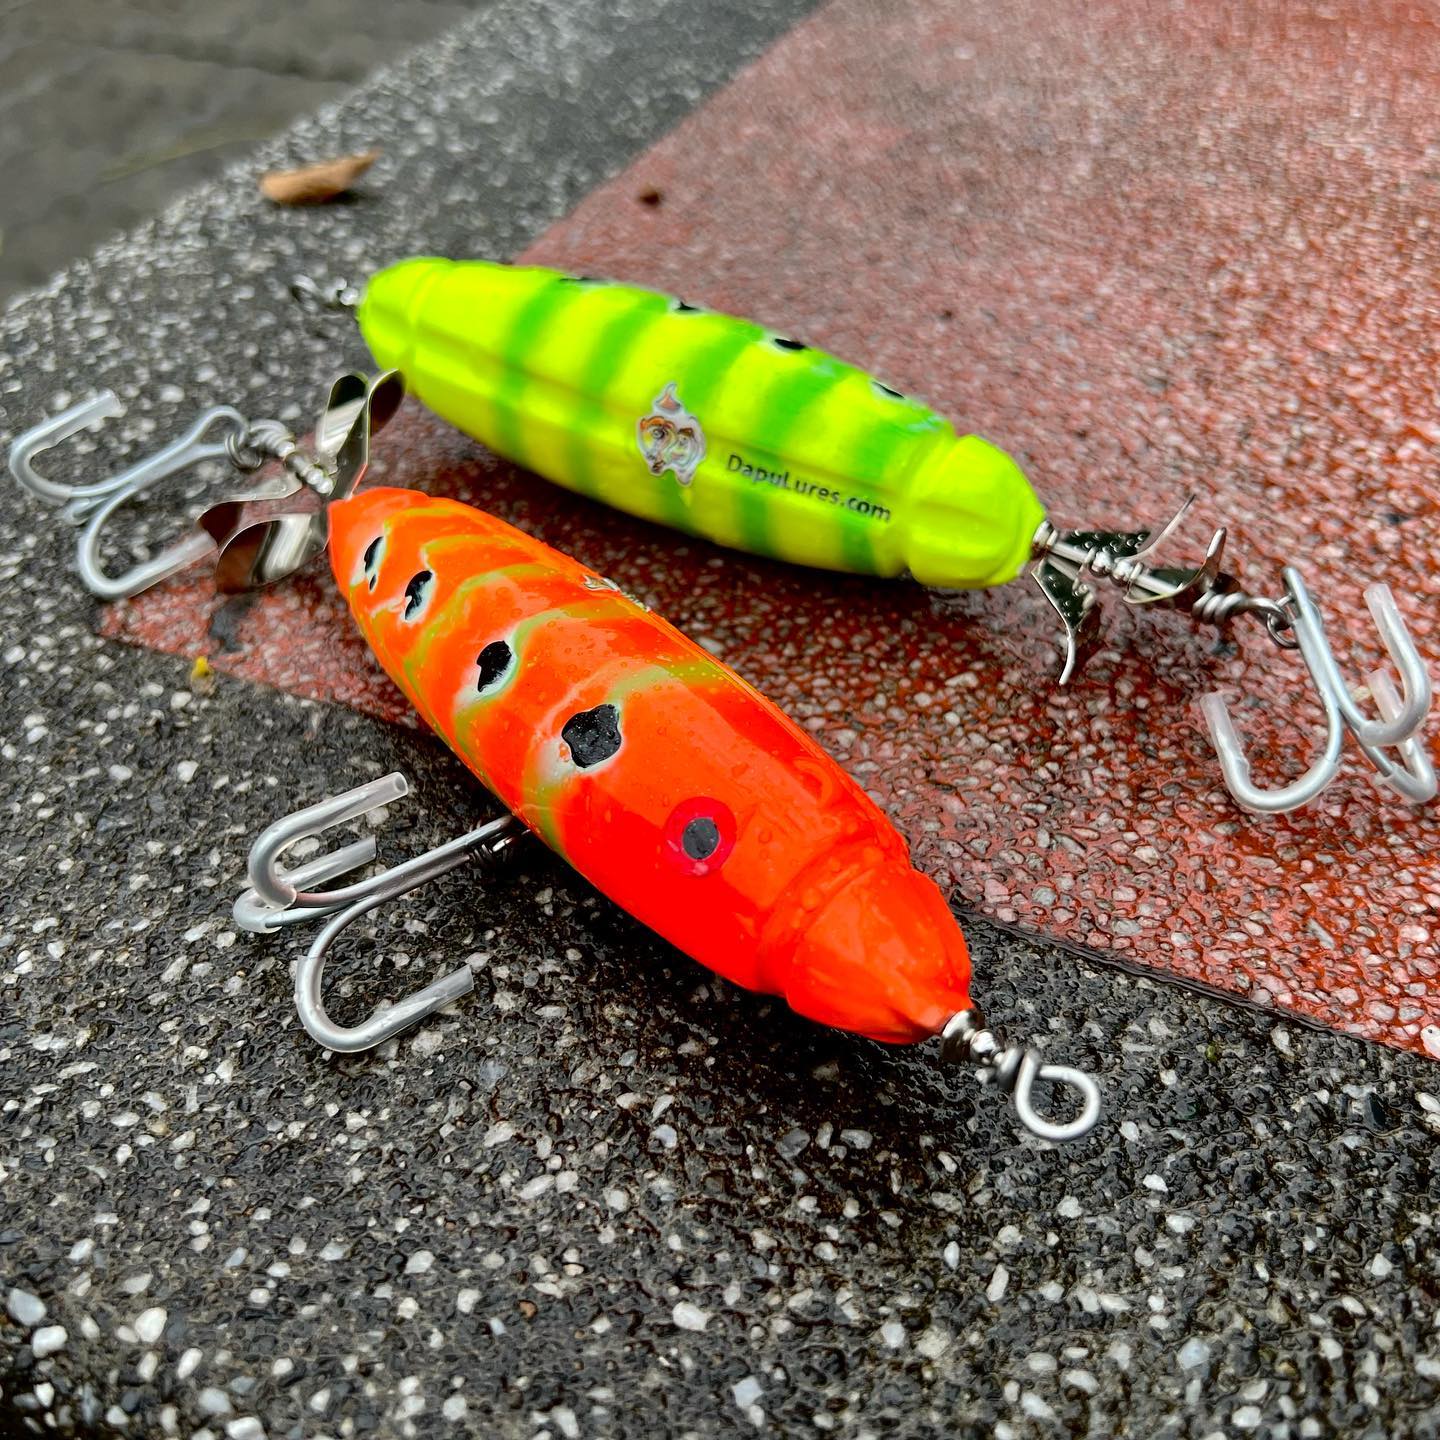 One more big bait “woodchopper” like from @dapulures Thanks to David to present me new colors! I’ll take this to Amazonia expedition for huge peacocks.